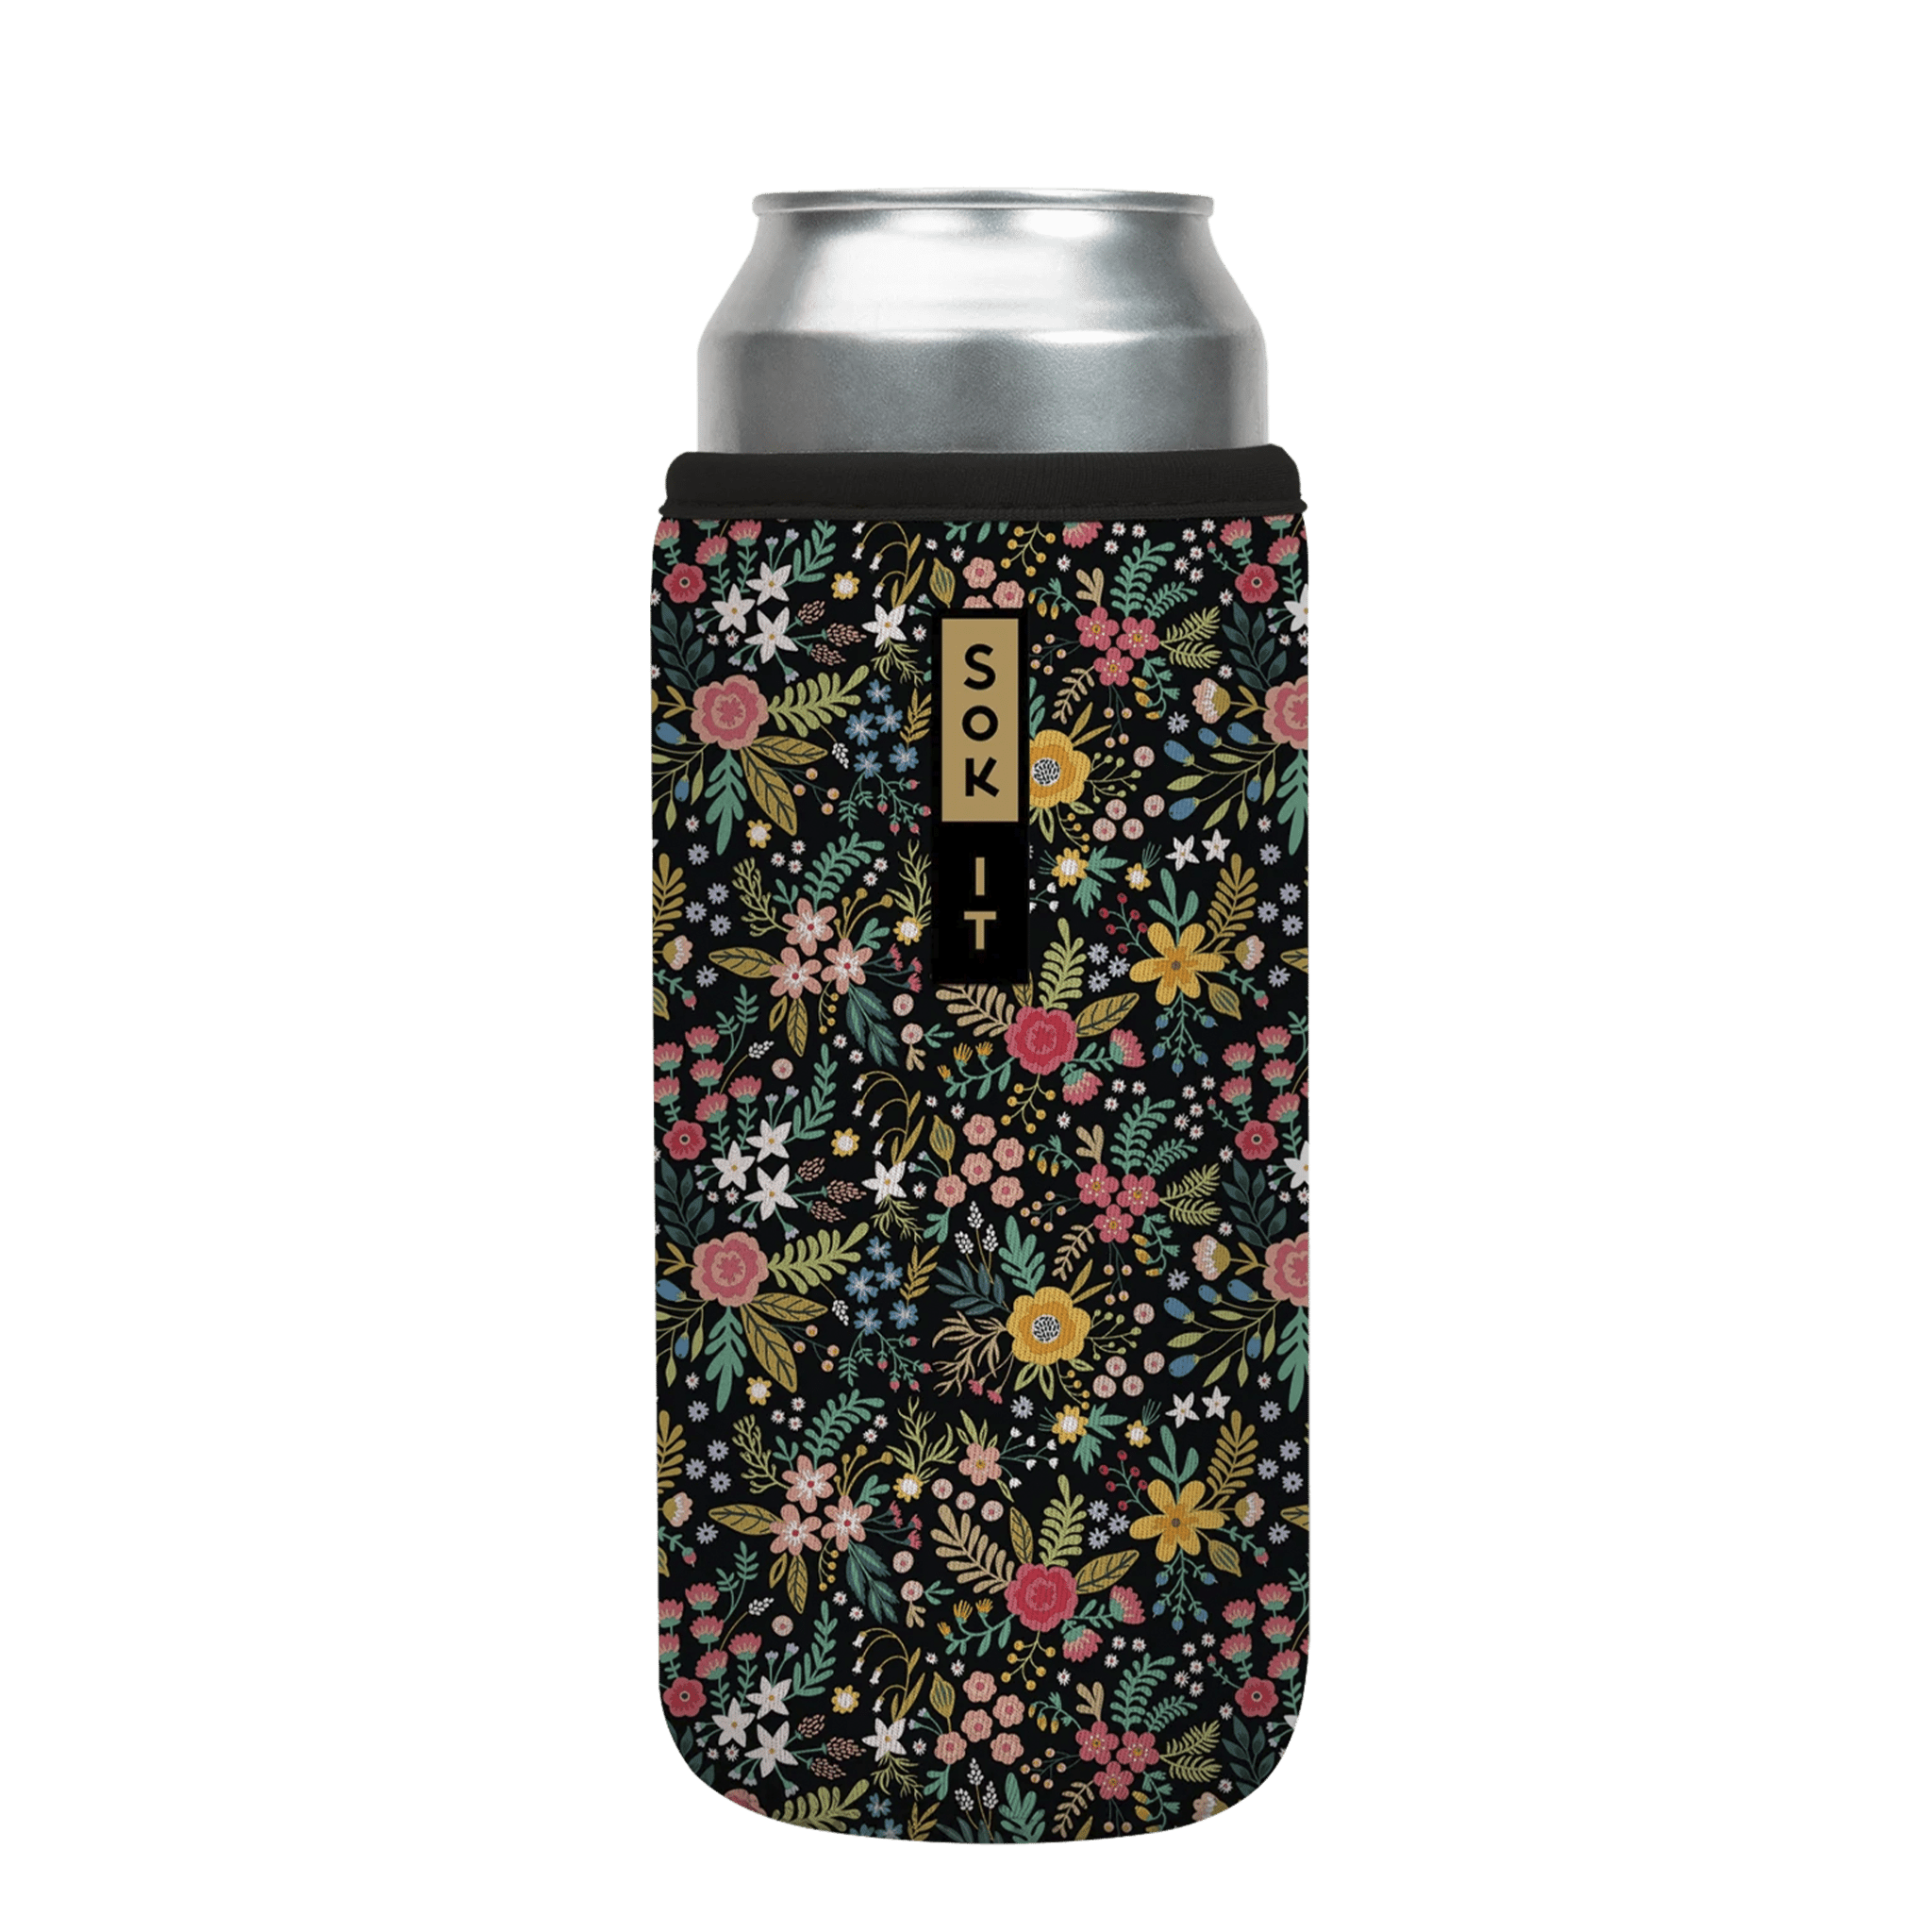 CanSok-FW Floral 25oz Can 